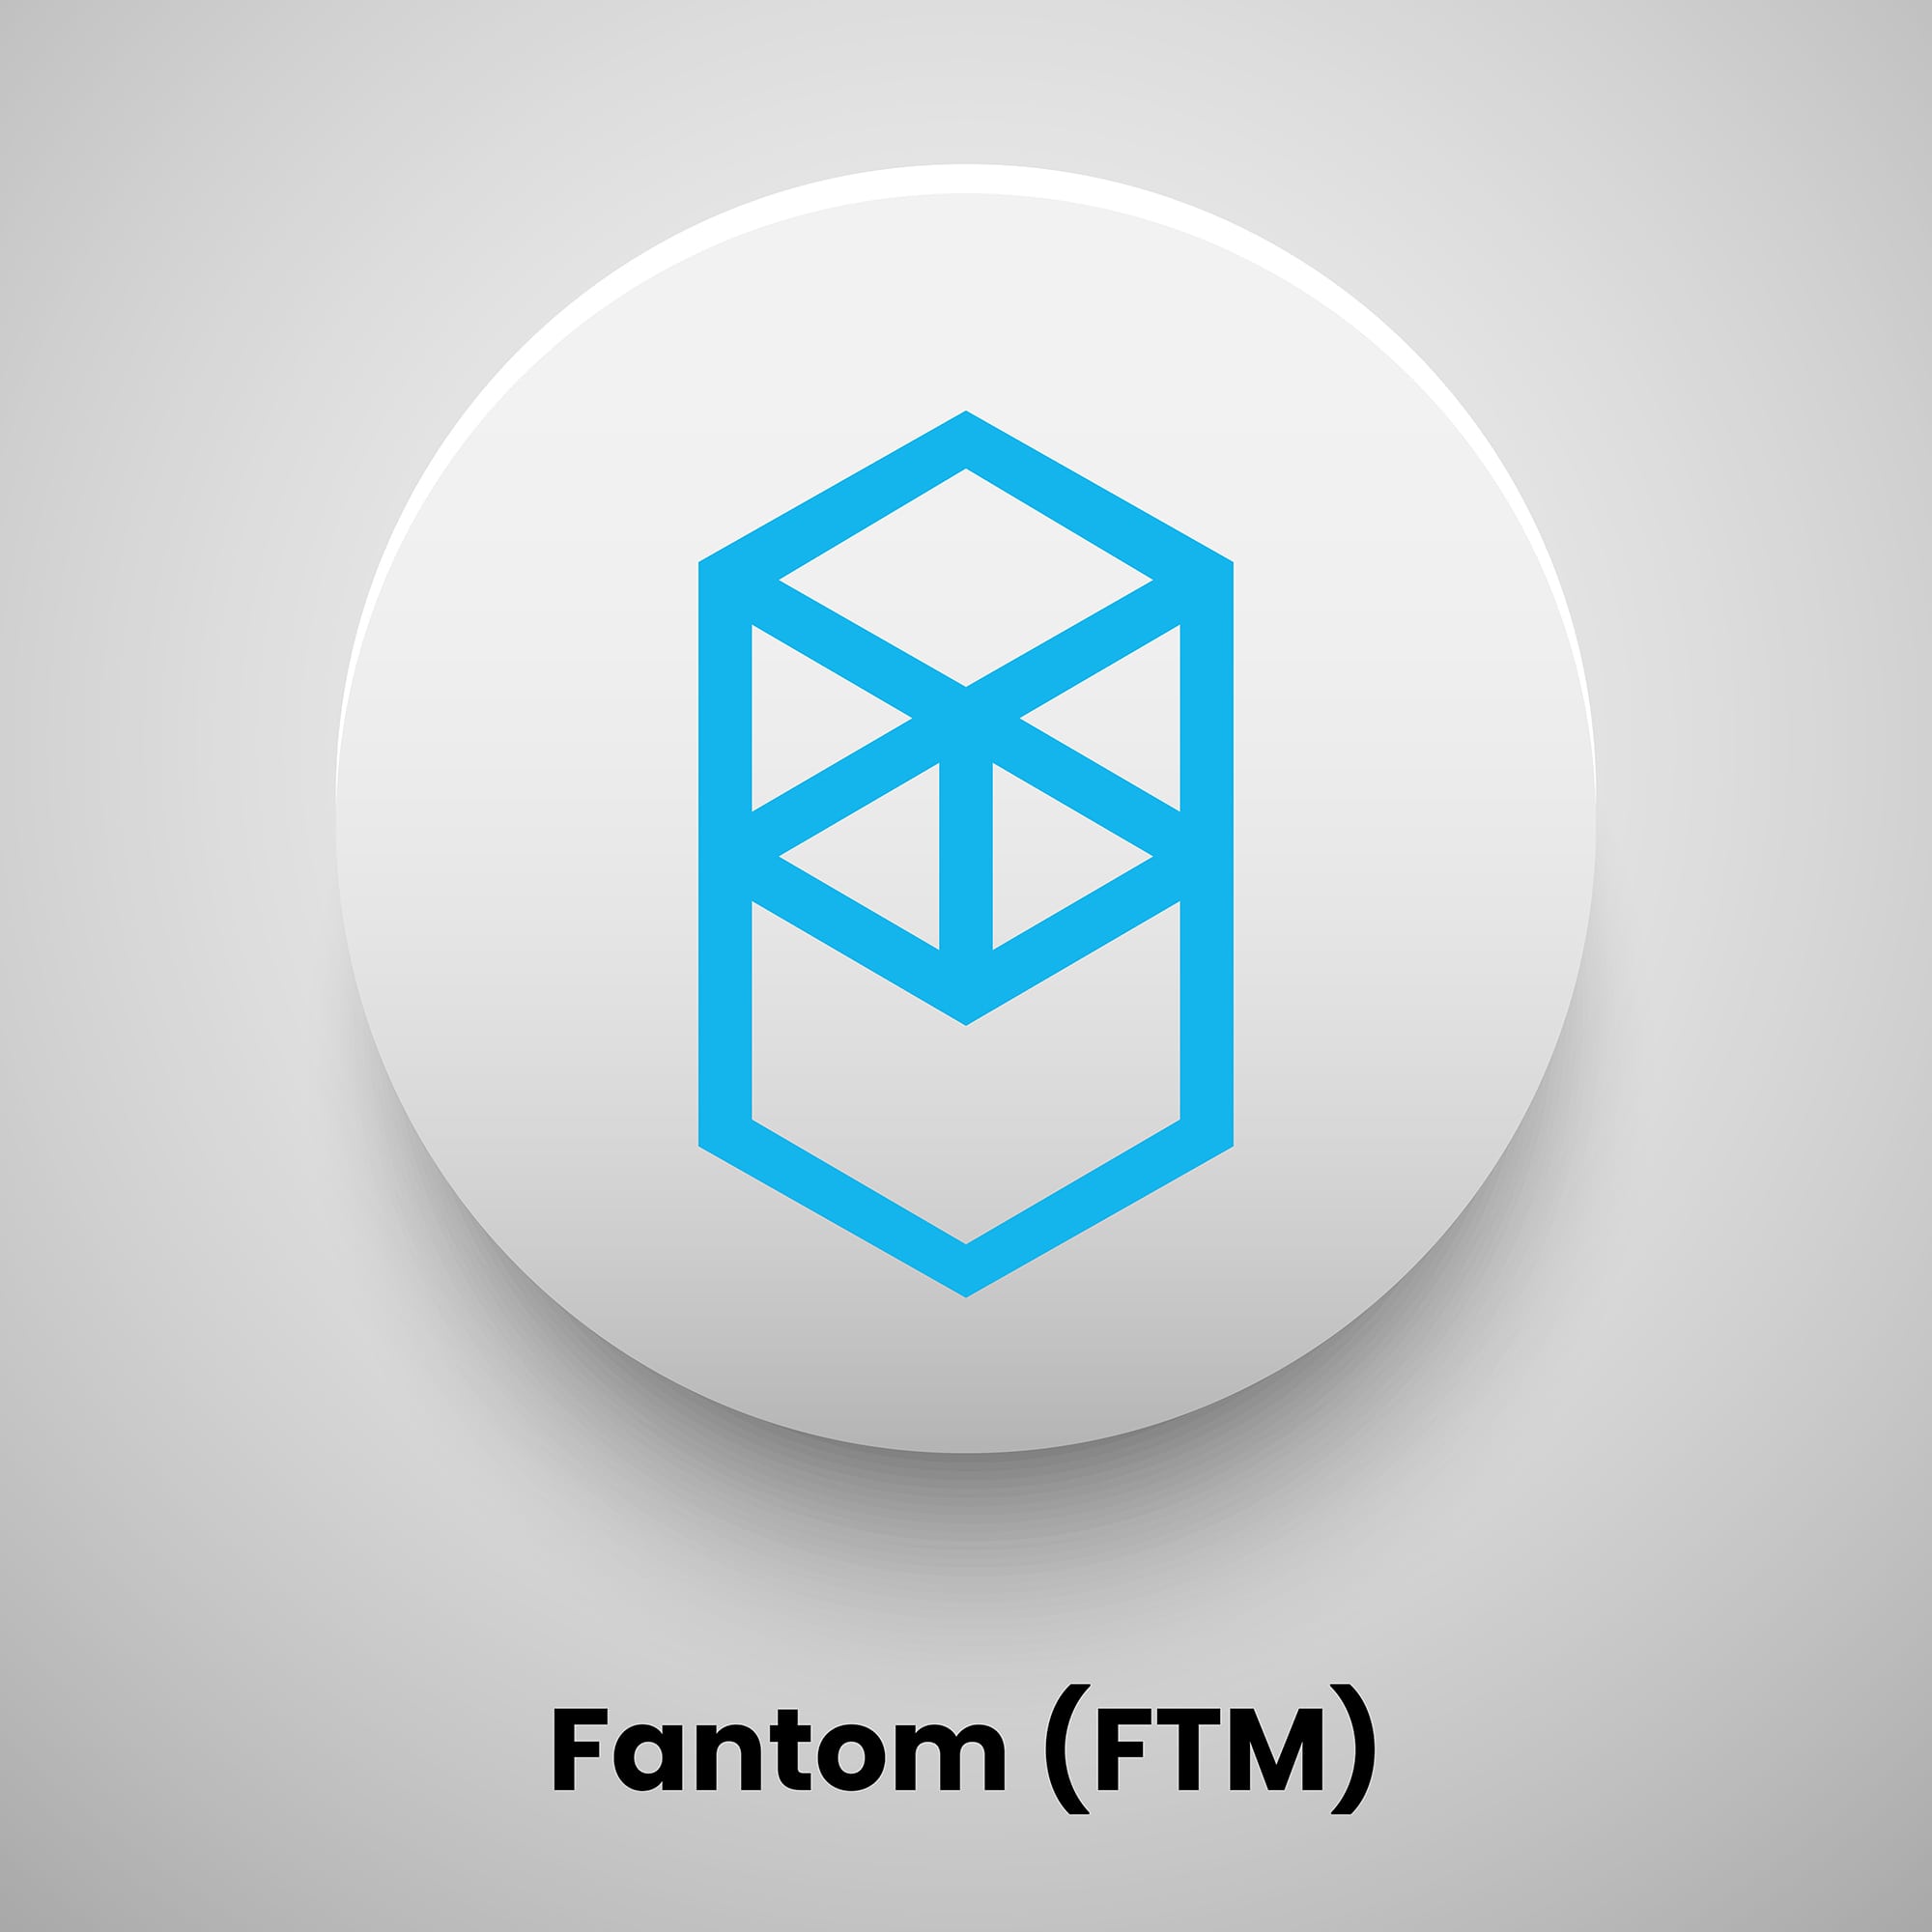 Fantom (FTM) crypto currency logo free vector download